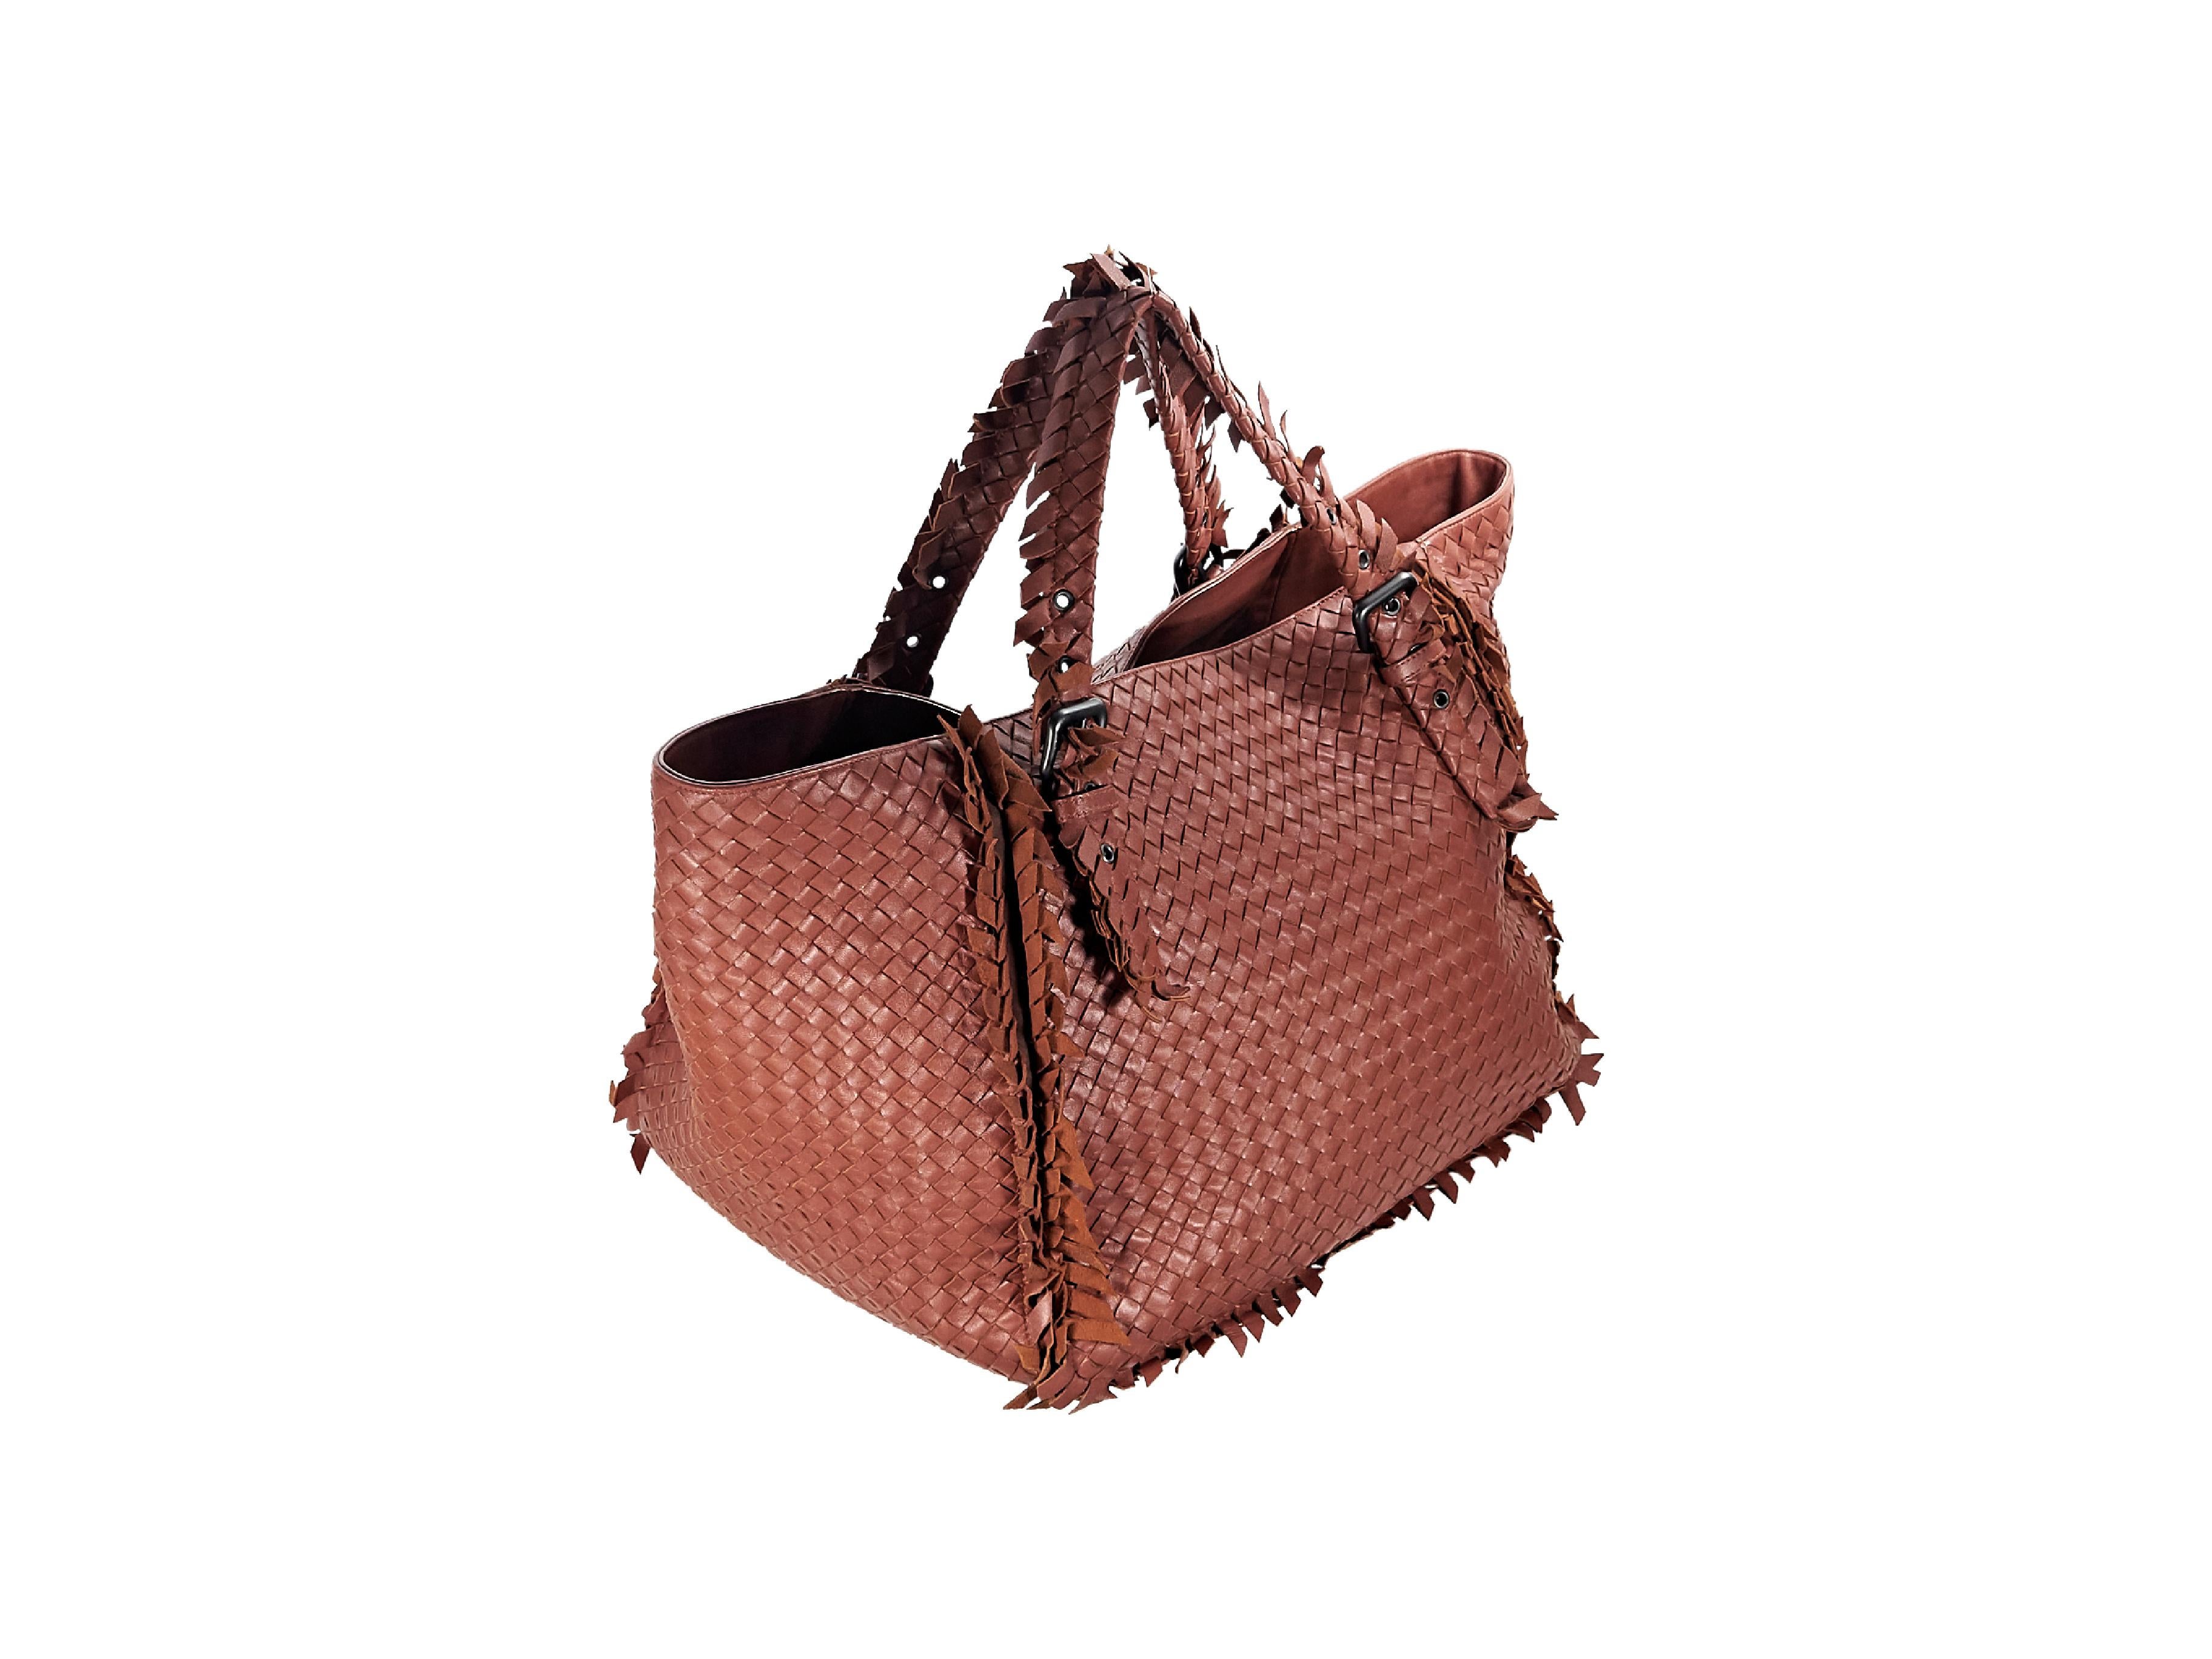 Product details:  Rust nappa leather intrecciato large tote bag by Bottega Veneta.  Features fringed trim.  Dual adjustable shoulder straps.  Open top.  Lined interior with inner zip and slide pockets.  Antiqued silvertone hardware.  Dust bag